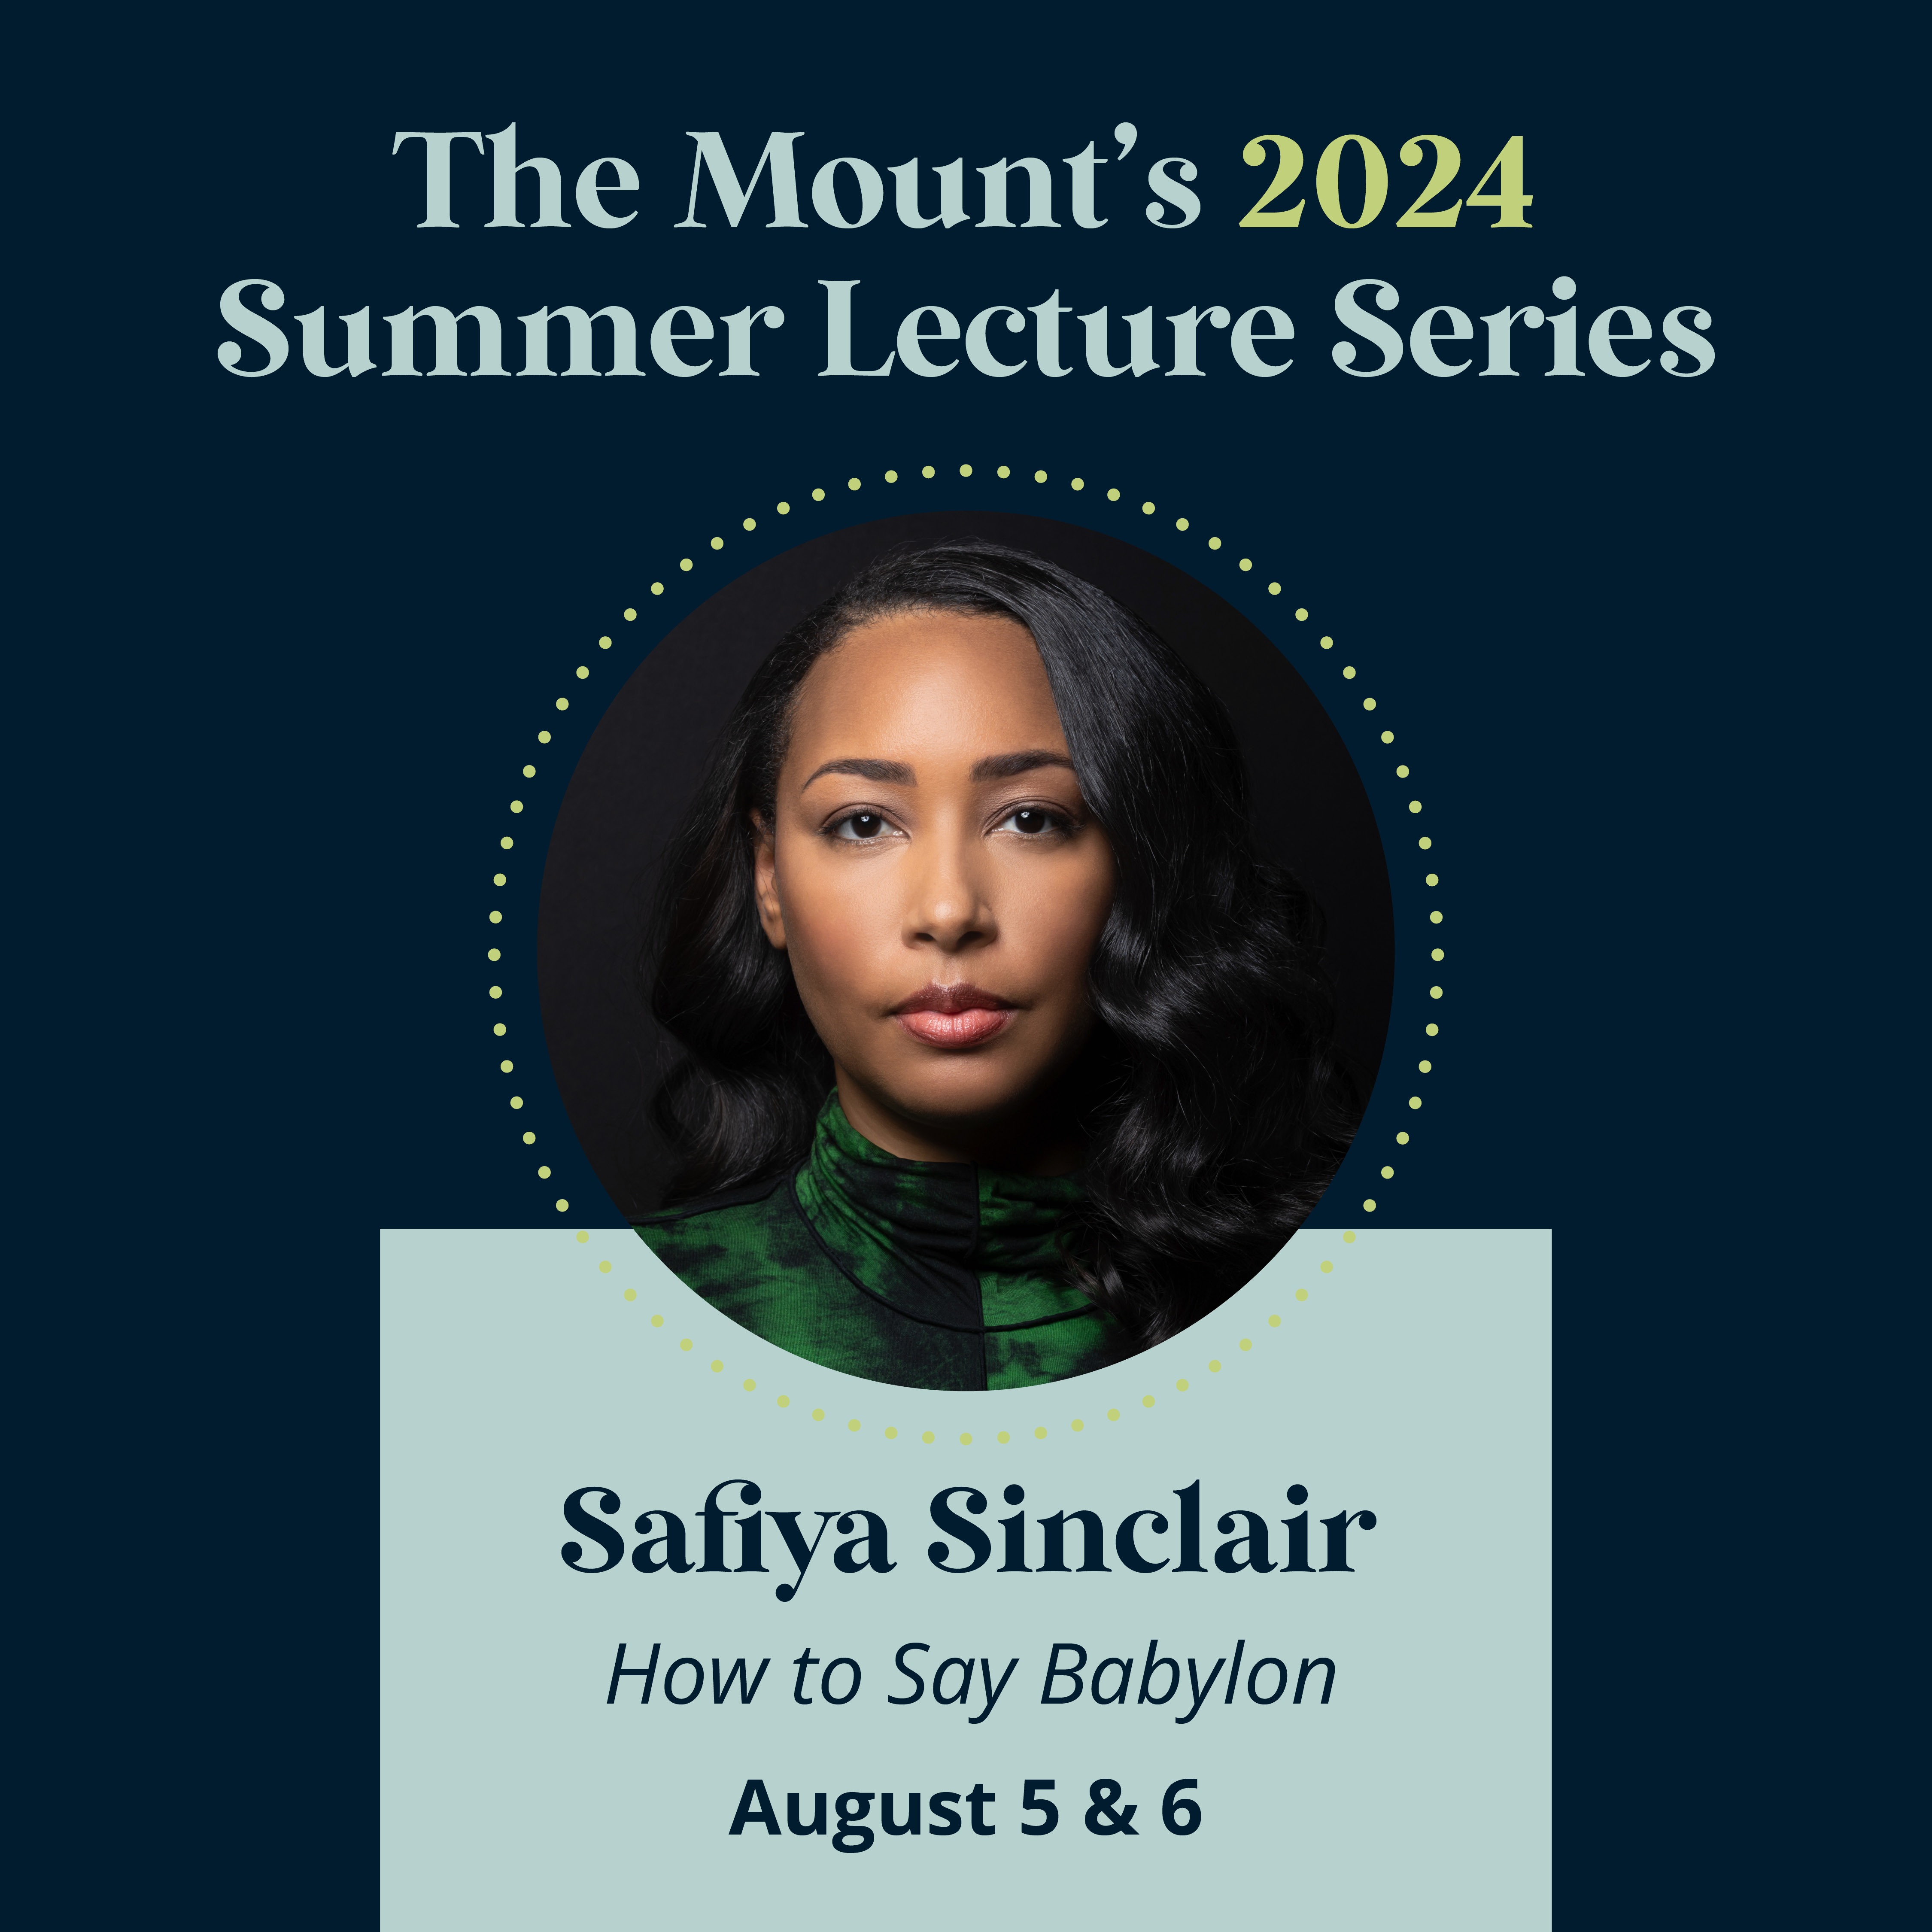 Monday lecture with Safiya Sinclair